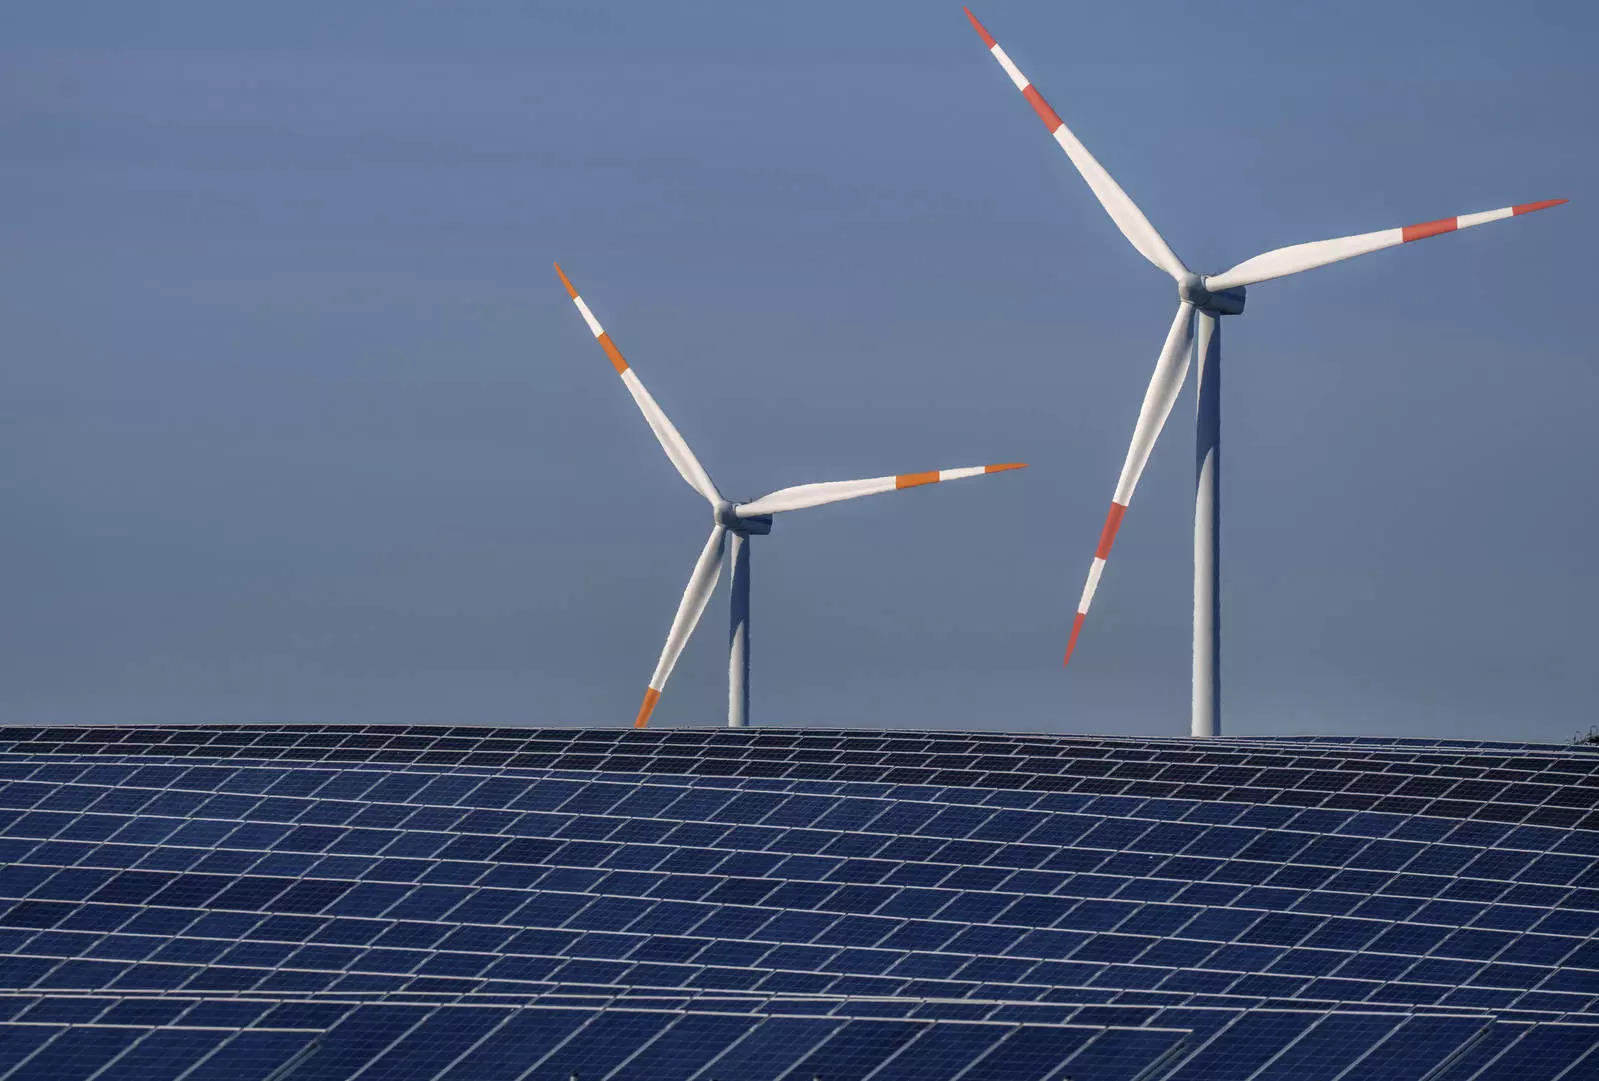  The Paris-based IEA said progress in solar energy is offset by a 40 percent drop in hydropower expansion and &quot;little change&quot; in wind additions.